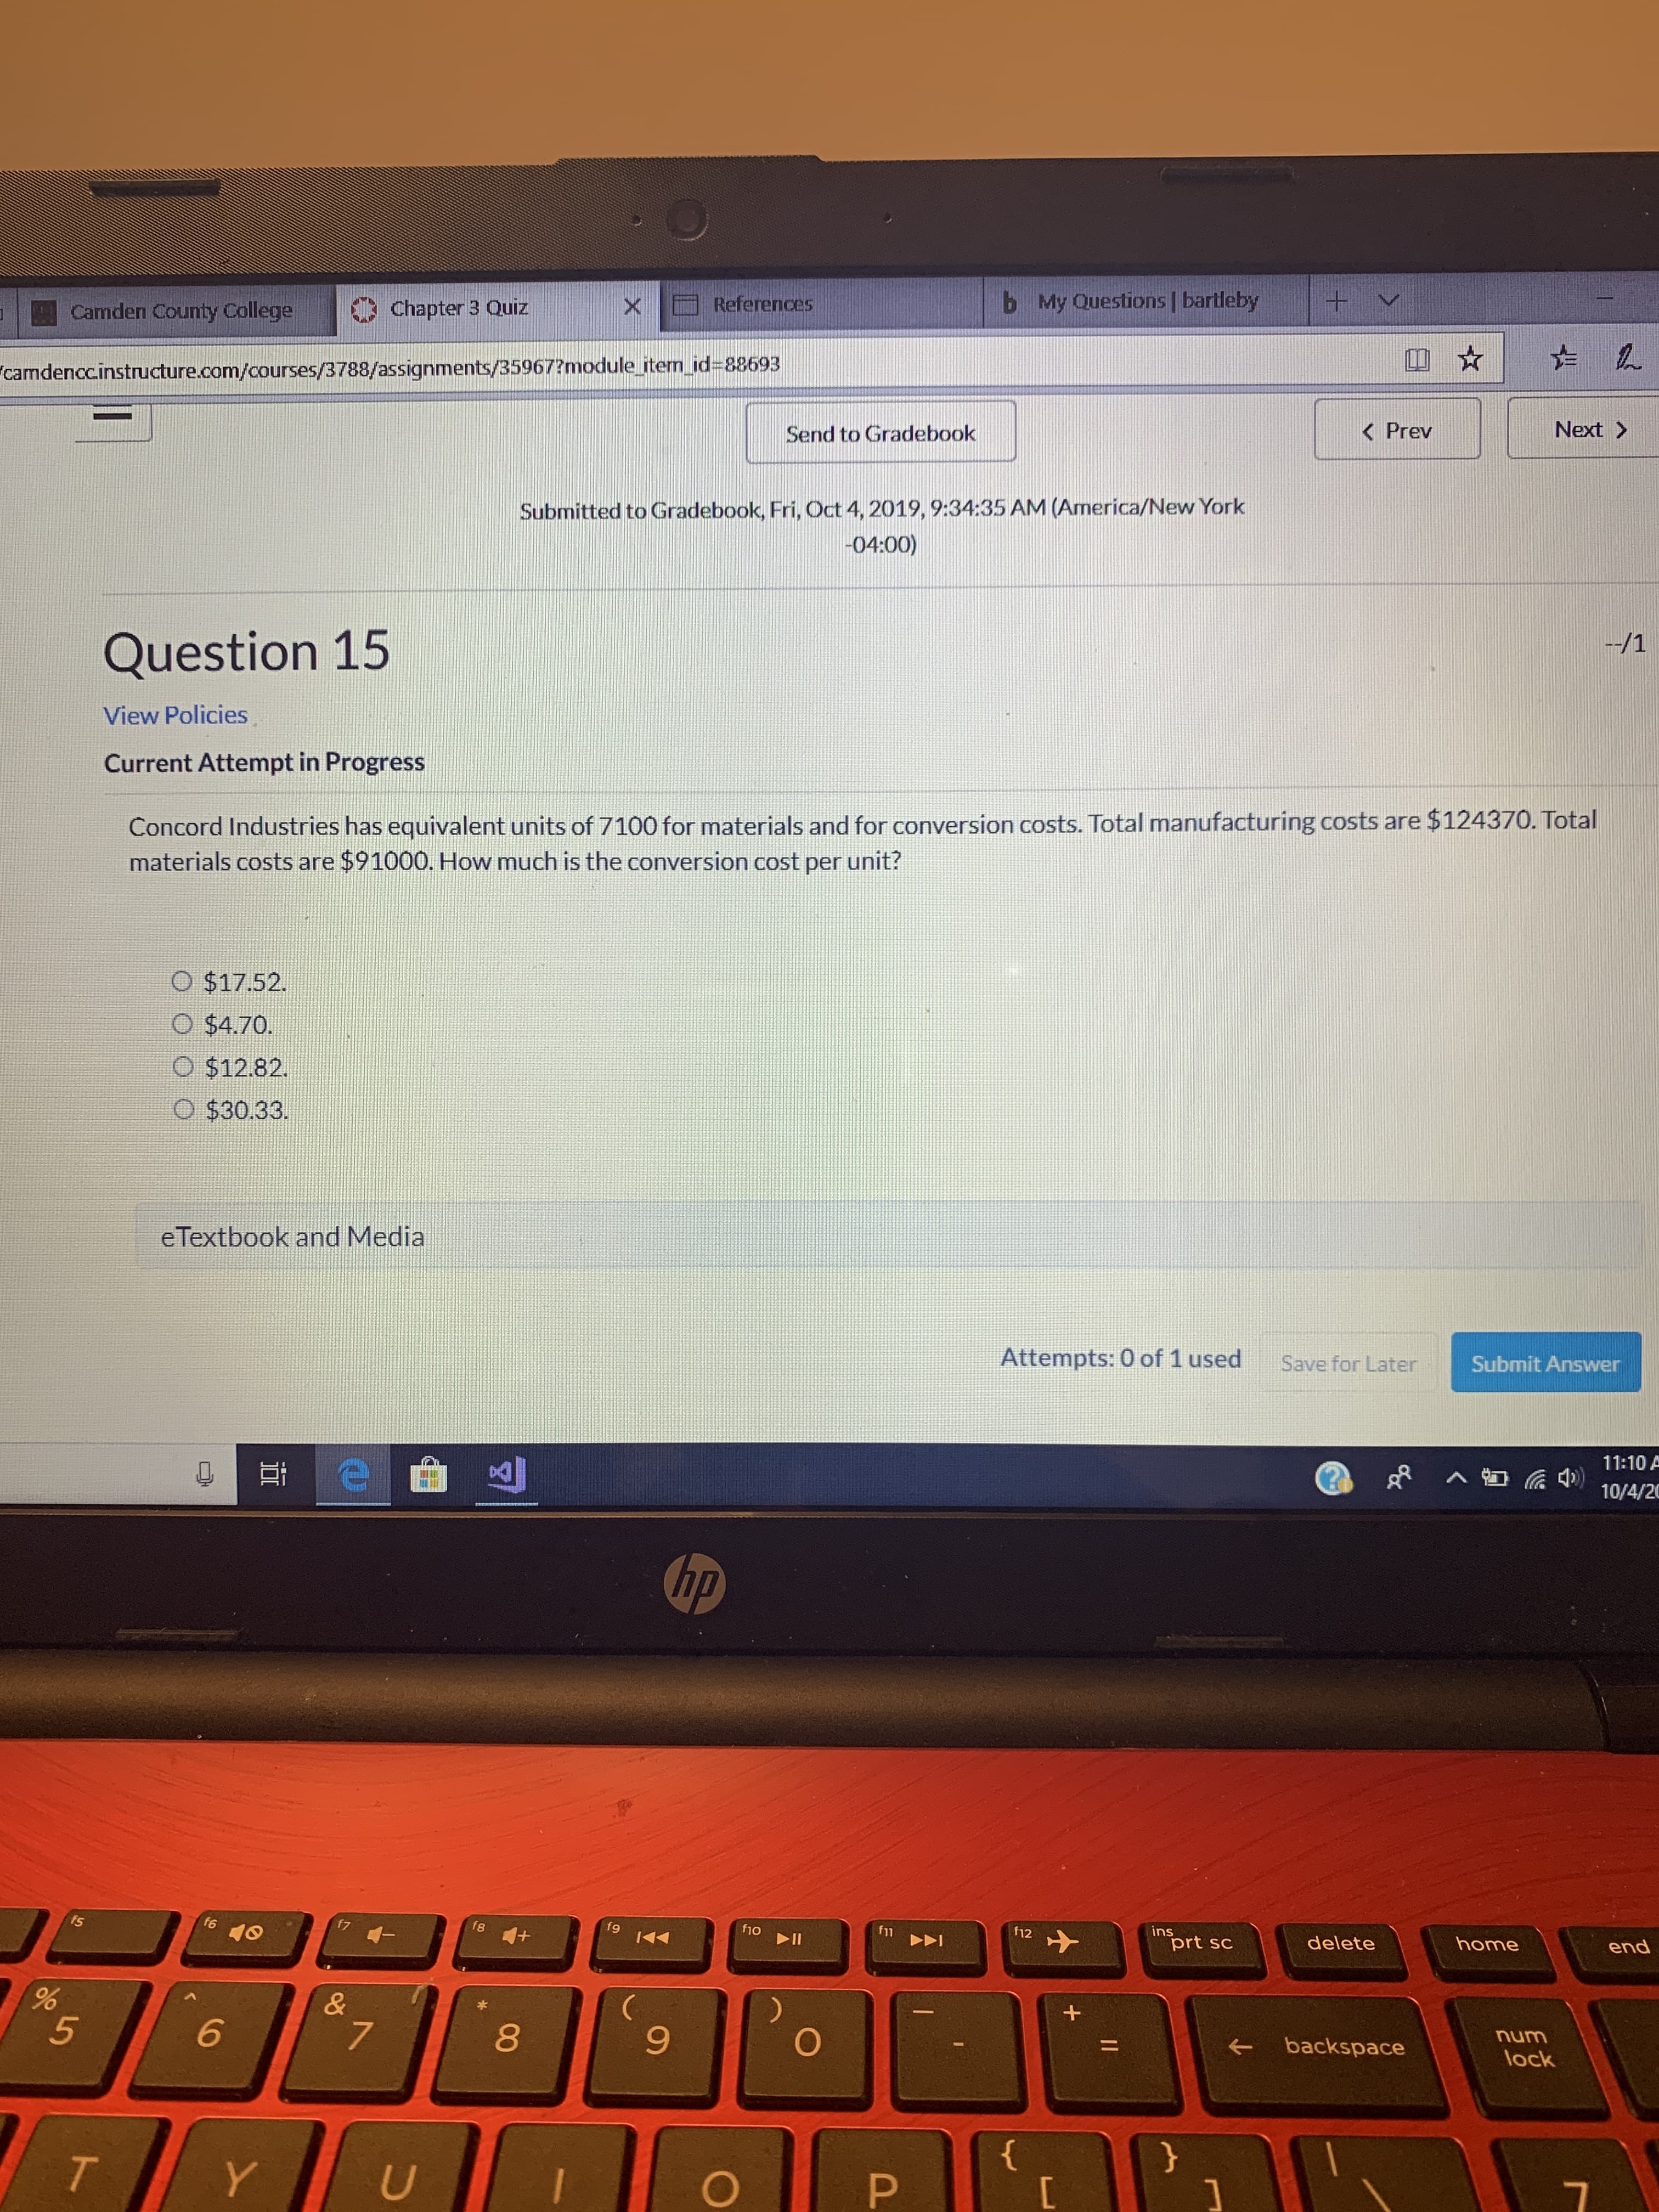 +V
My Questions | bartleby
b
References
Chapter 3 Quiz
Camden County College
camdenccinstructure.com/courses/3788/assignments/35967?module_item id=88693|
Next>
K Prev
Send to Gradebook
Submitted to Gradebook, Fri, Oct 4, 2019, 9:34:35 AM (America/New York
-04:00)
--/1
Question 15
View Policies
Current Attempt in Progress
Concord Industries has equivalent units of 7100 for materials and for conversion costs. Total manufacturing costs are $124370. Total
materials costs are $91000. How much is the conversion cost per unit?
O $17.52.
O $4.70.
$12.82.
O $30.33
eTextbook and Media
Submit Answer
Save for Later
Attempts: 0 of 1 used
11:10 A
10/4/20
hp
ins
prt sc
end
home
f12
11
DI
delete
f9
f8
f7
f6
fs
10
+
&
%
num
backspace
6
7
lock
5
{
P
T
U
Y
II
96
